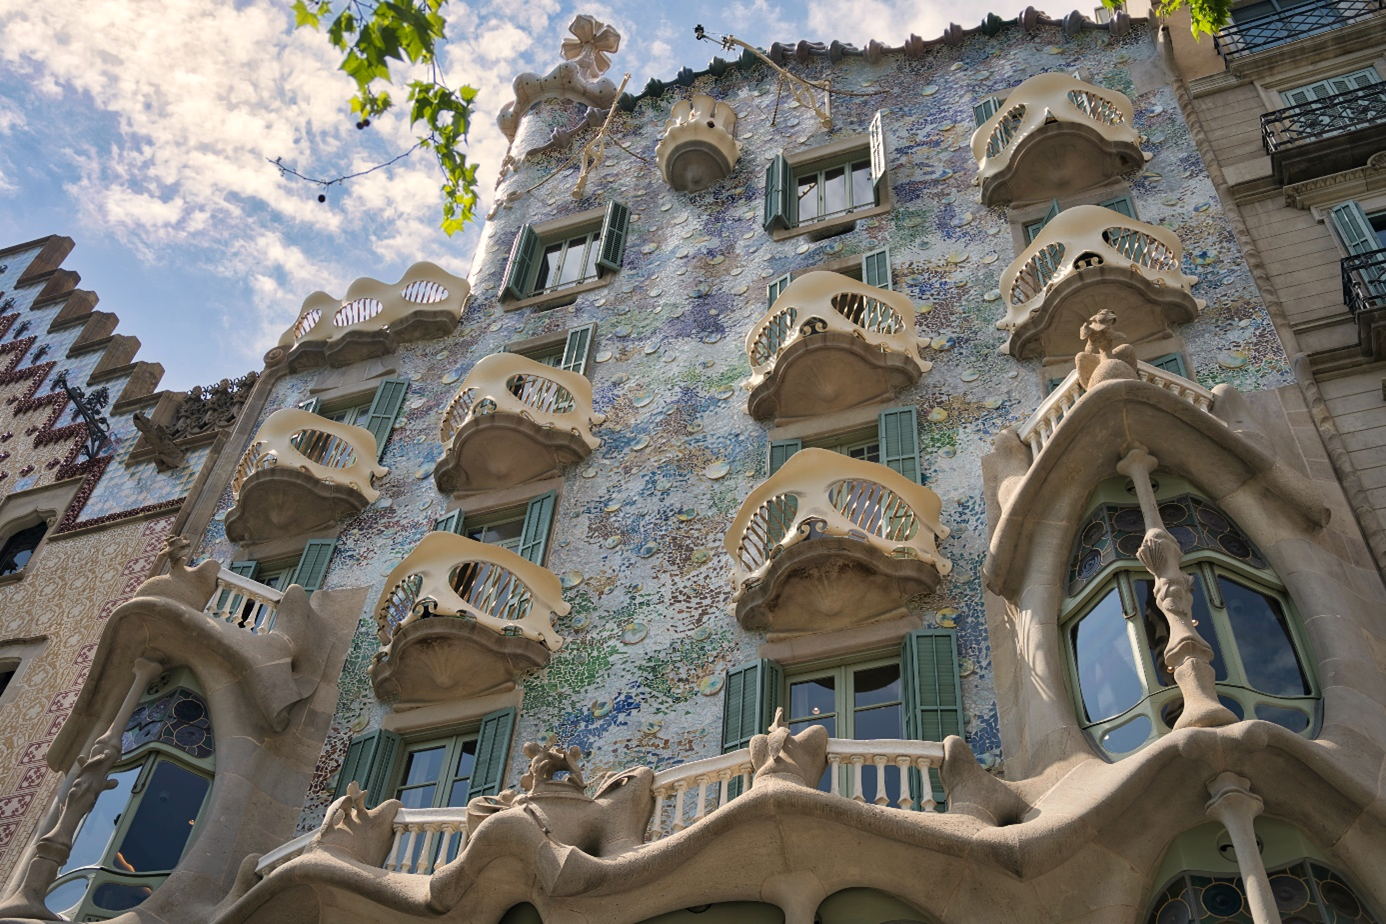 Casa Batlló is probably one of the most famous Gaudí houses you must see on this list